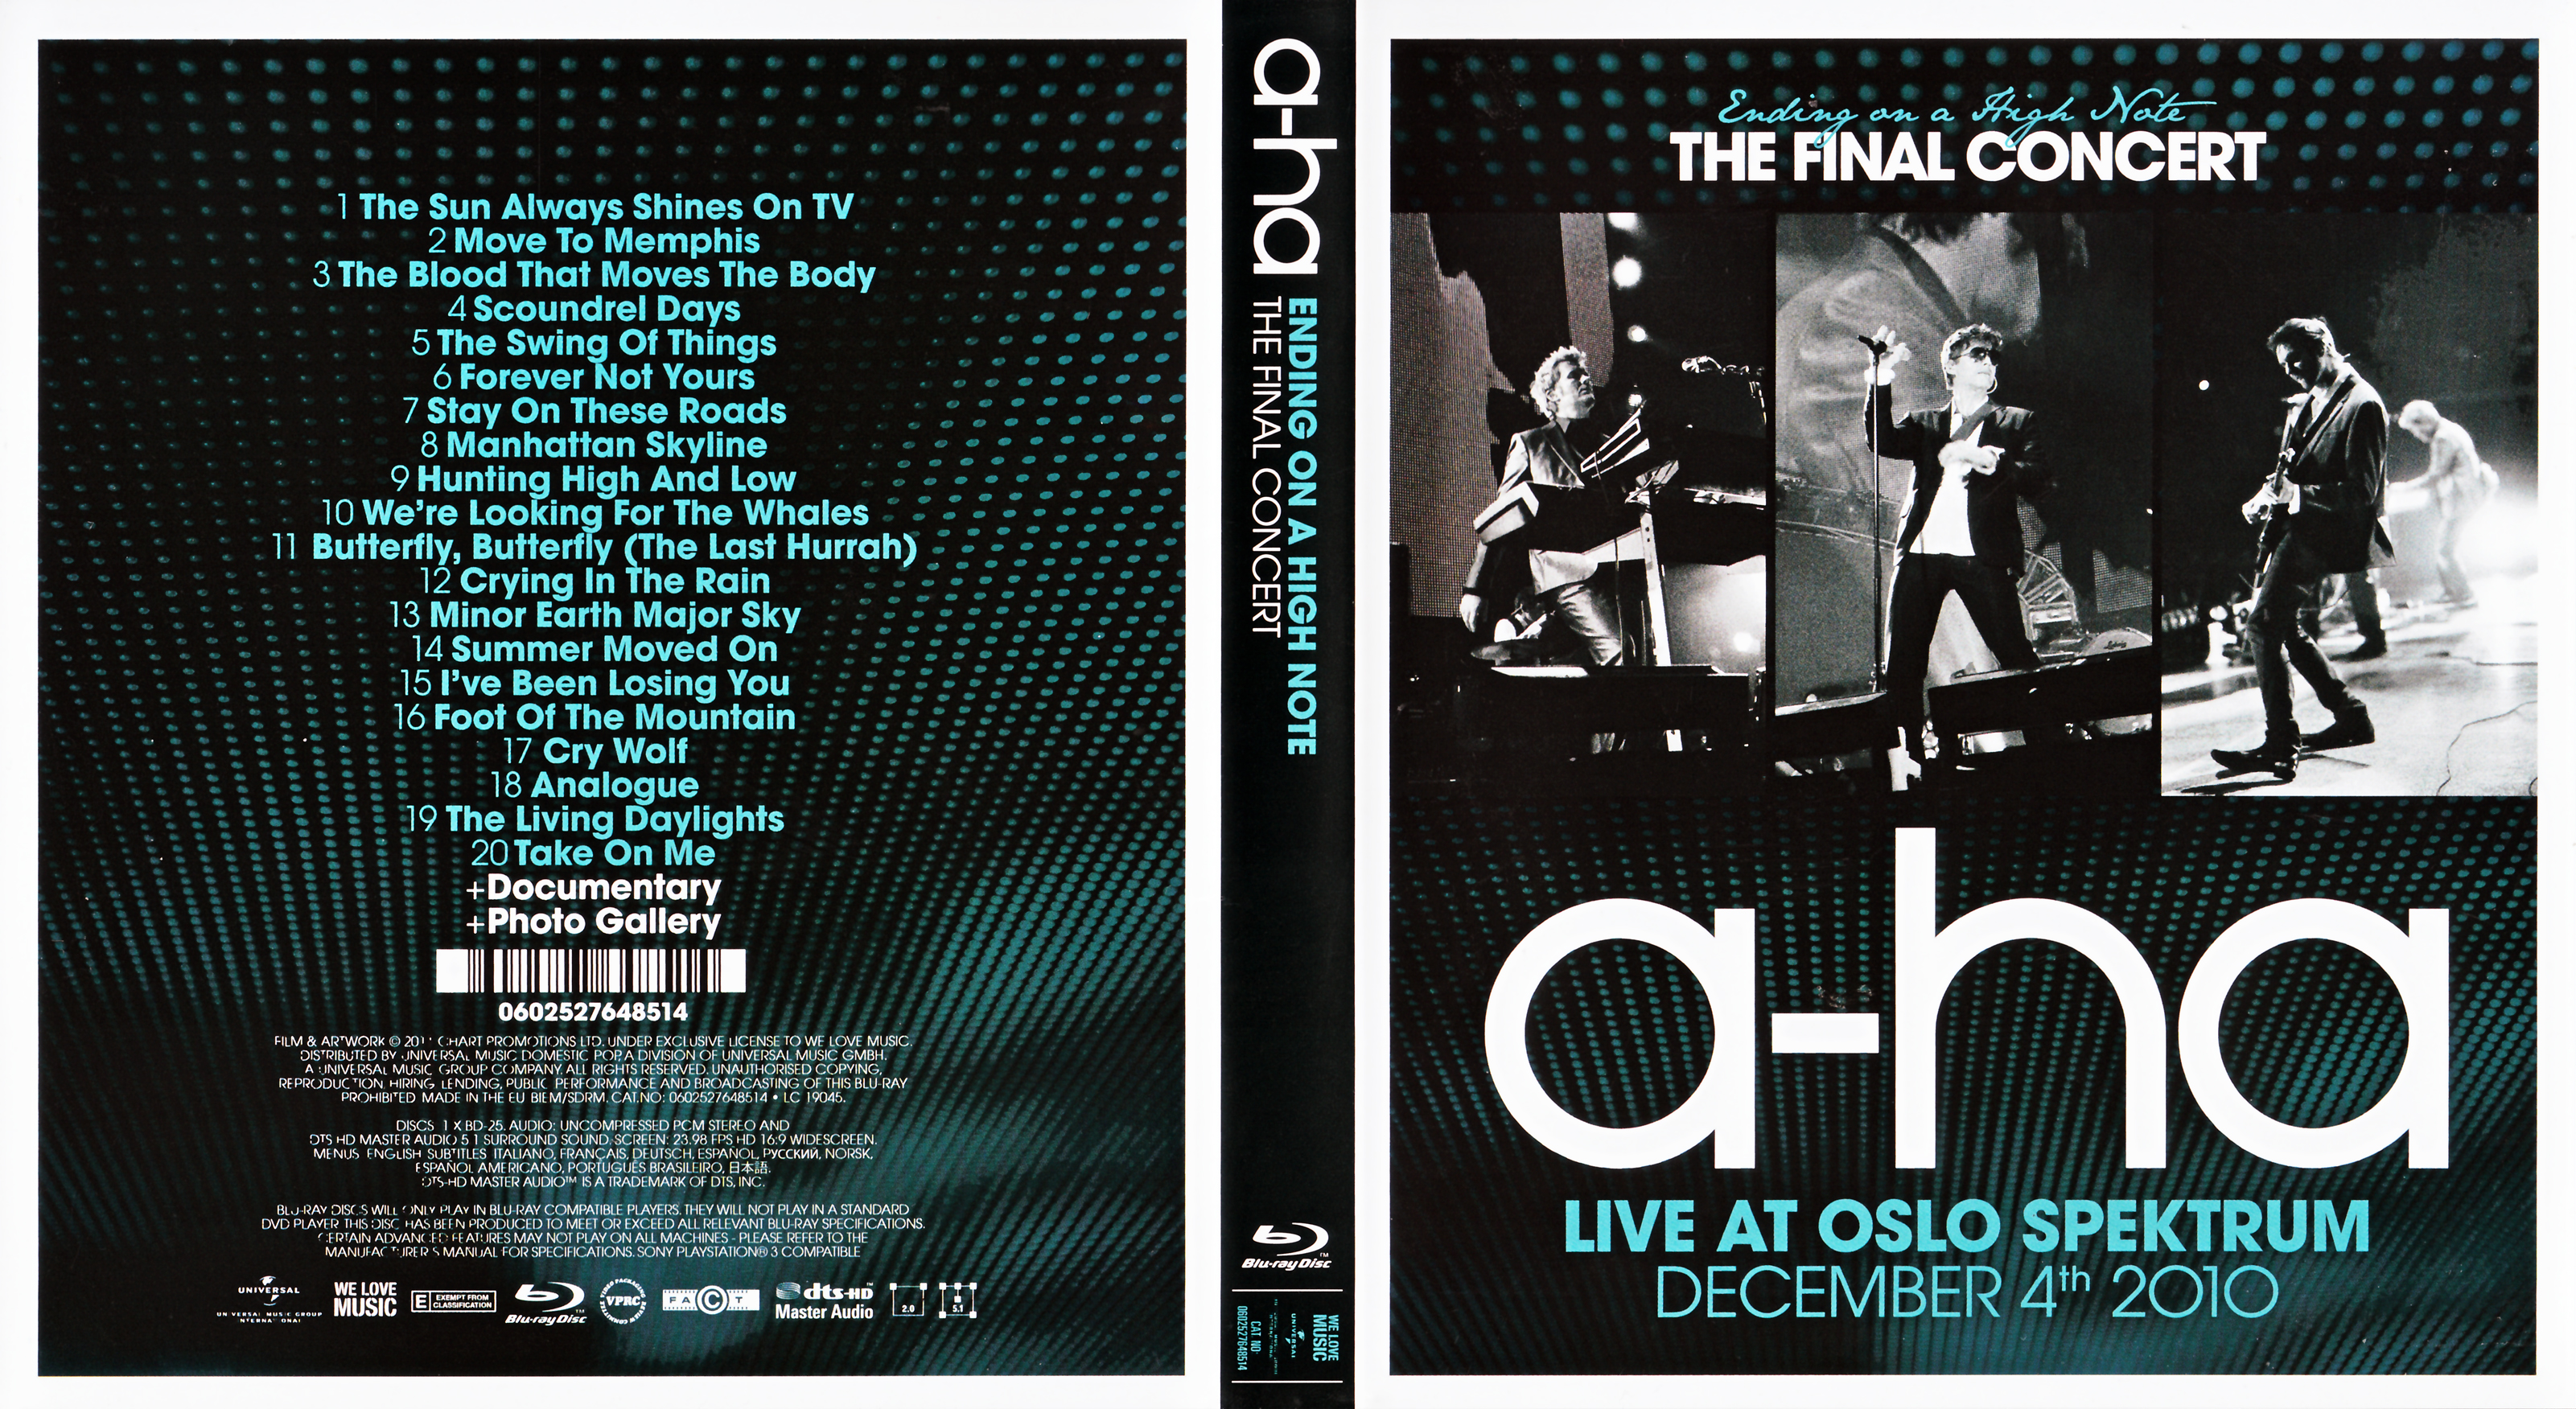 Jaquette DVD A-Ha - Ending on a high note - The Final Concert (BLU-RAY)